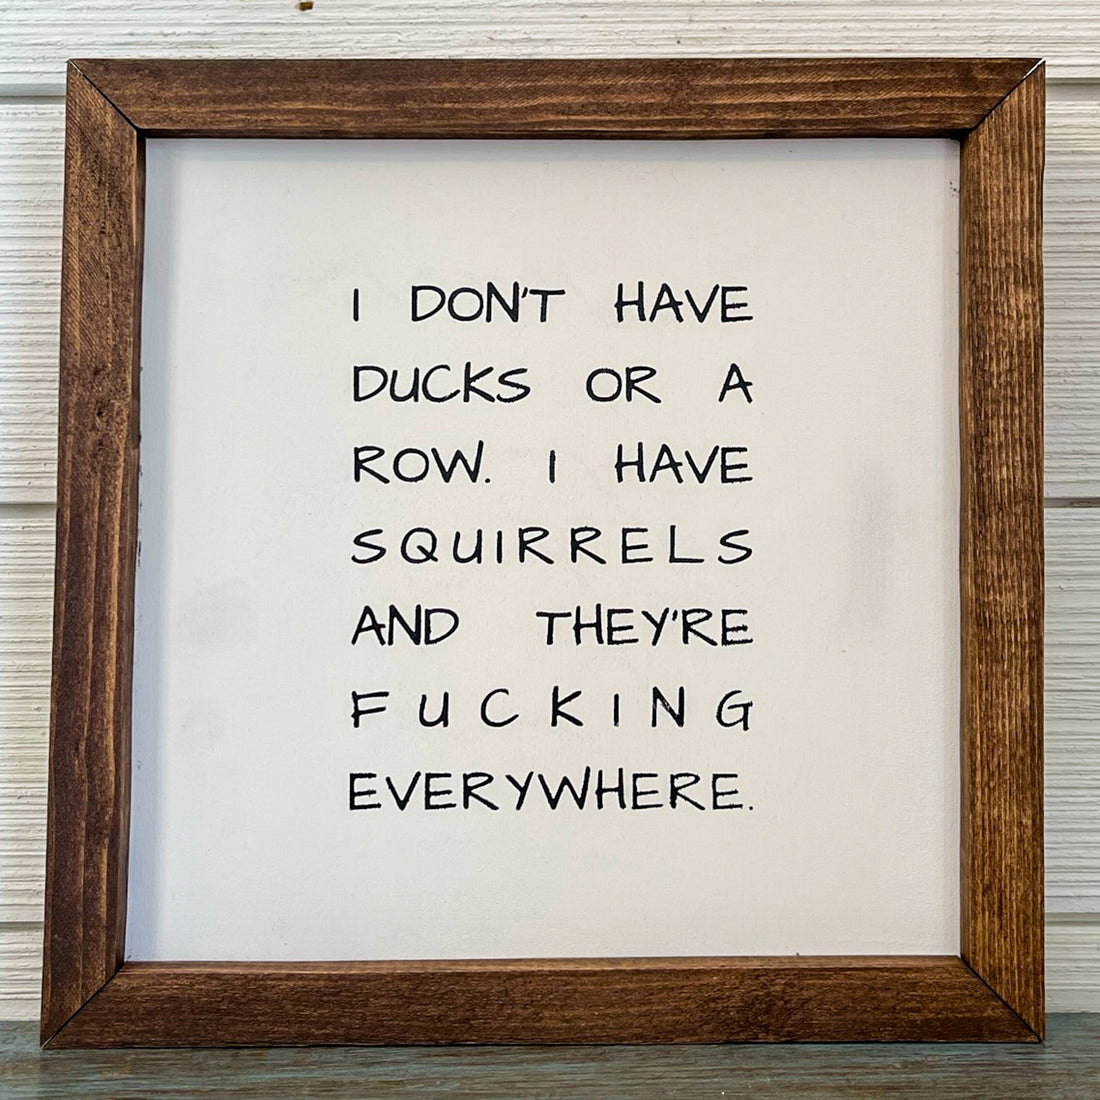 I don't have ducks. I have squirrels.